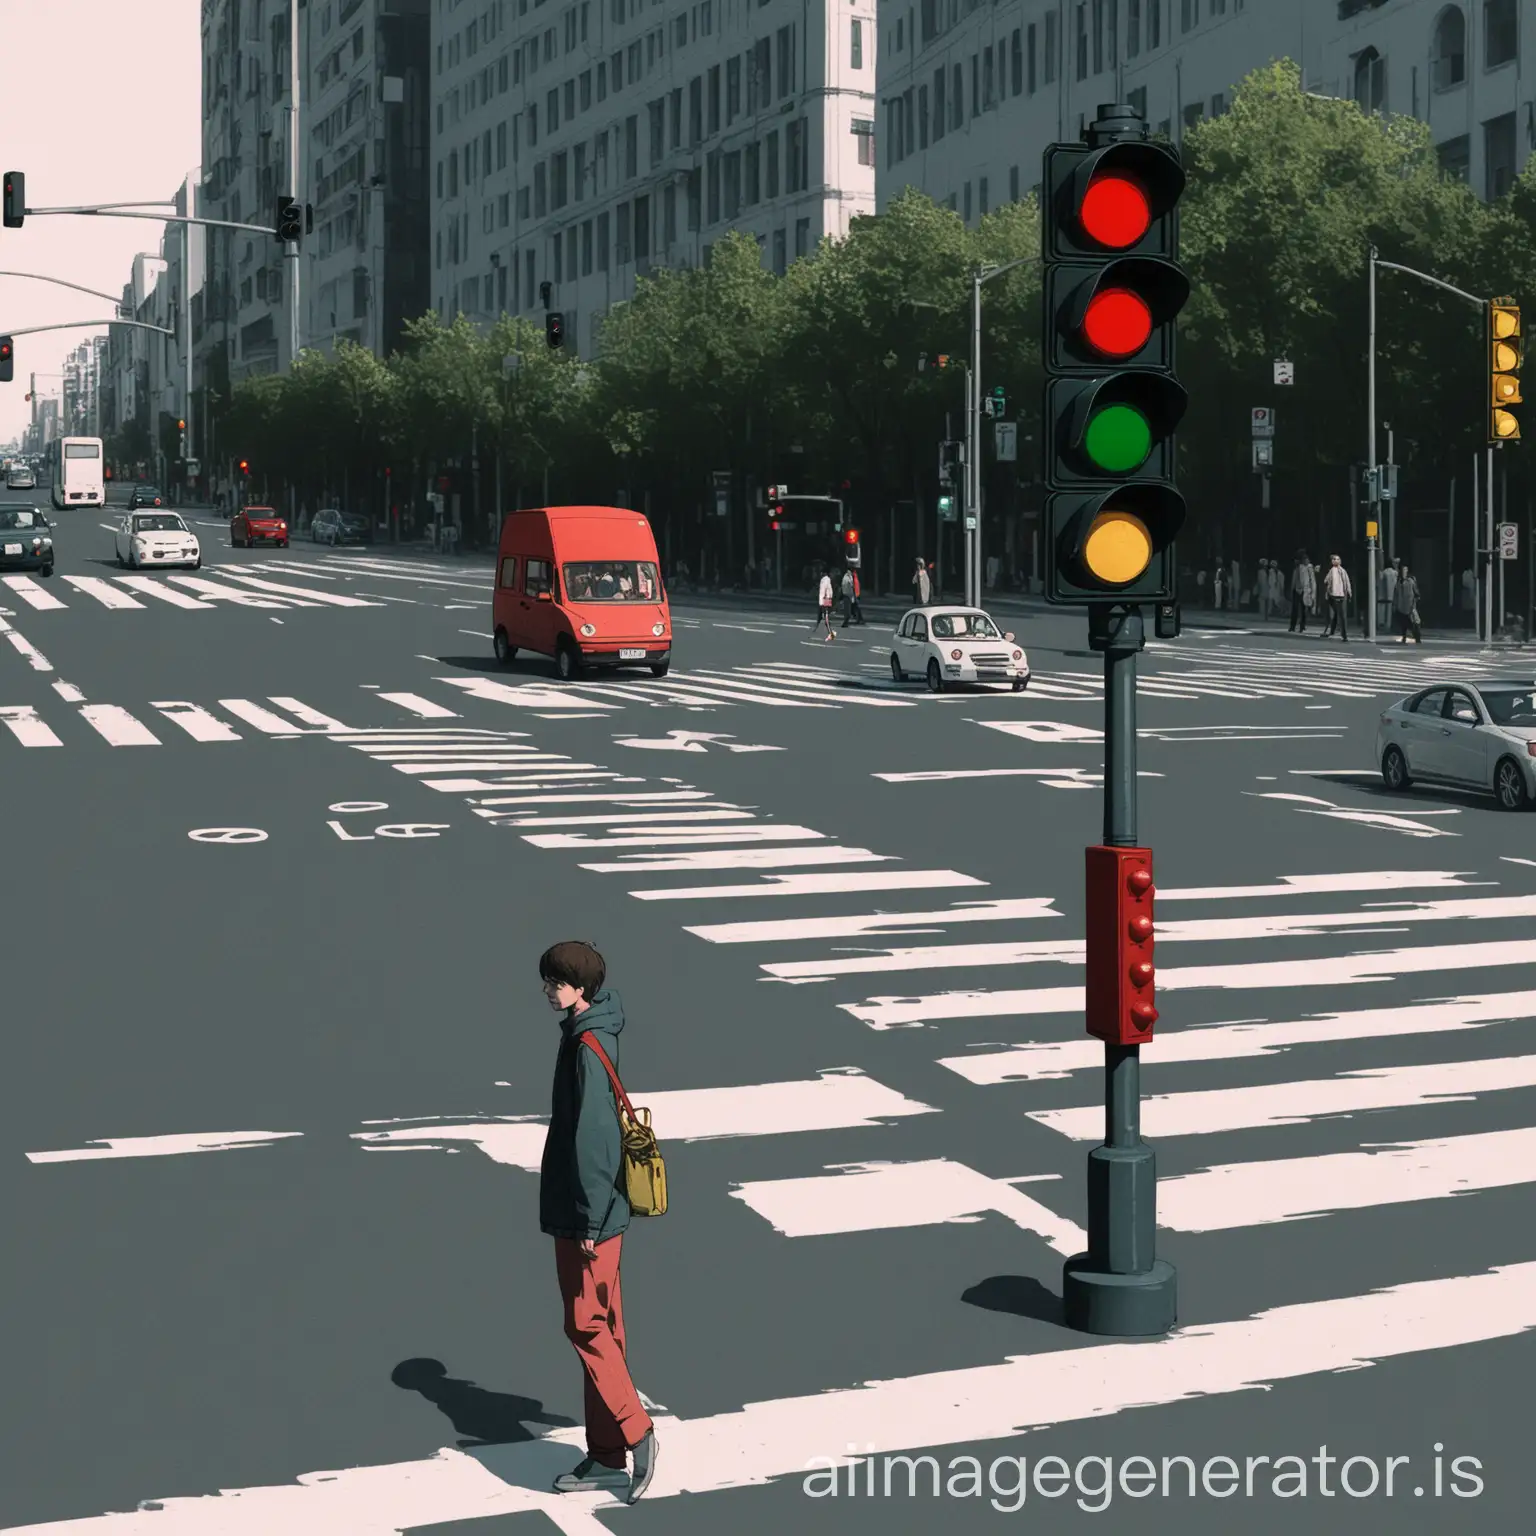 a pedestrian standing on the curb, the pedestrian traffic light is red. There are some cars on the straight road.